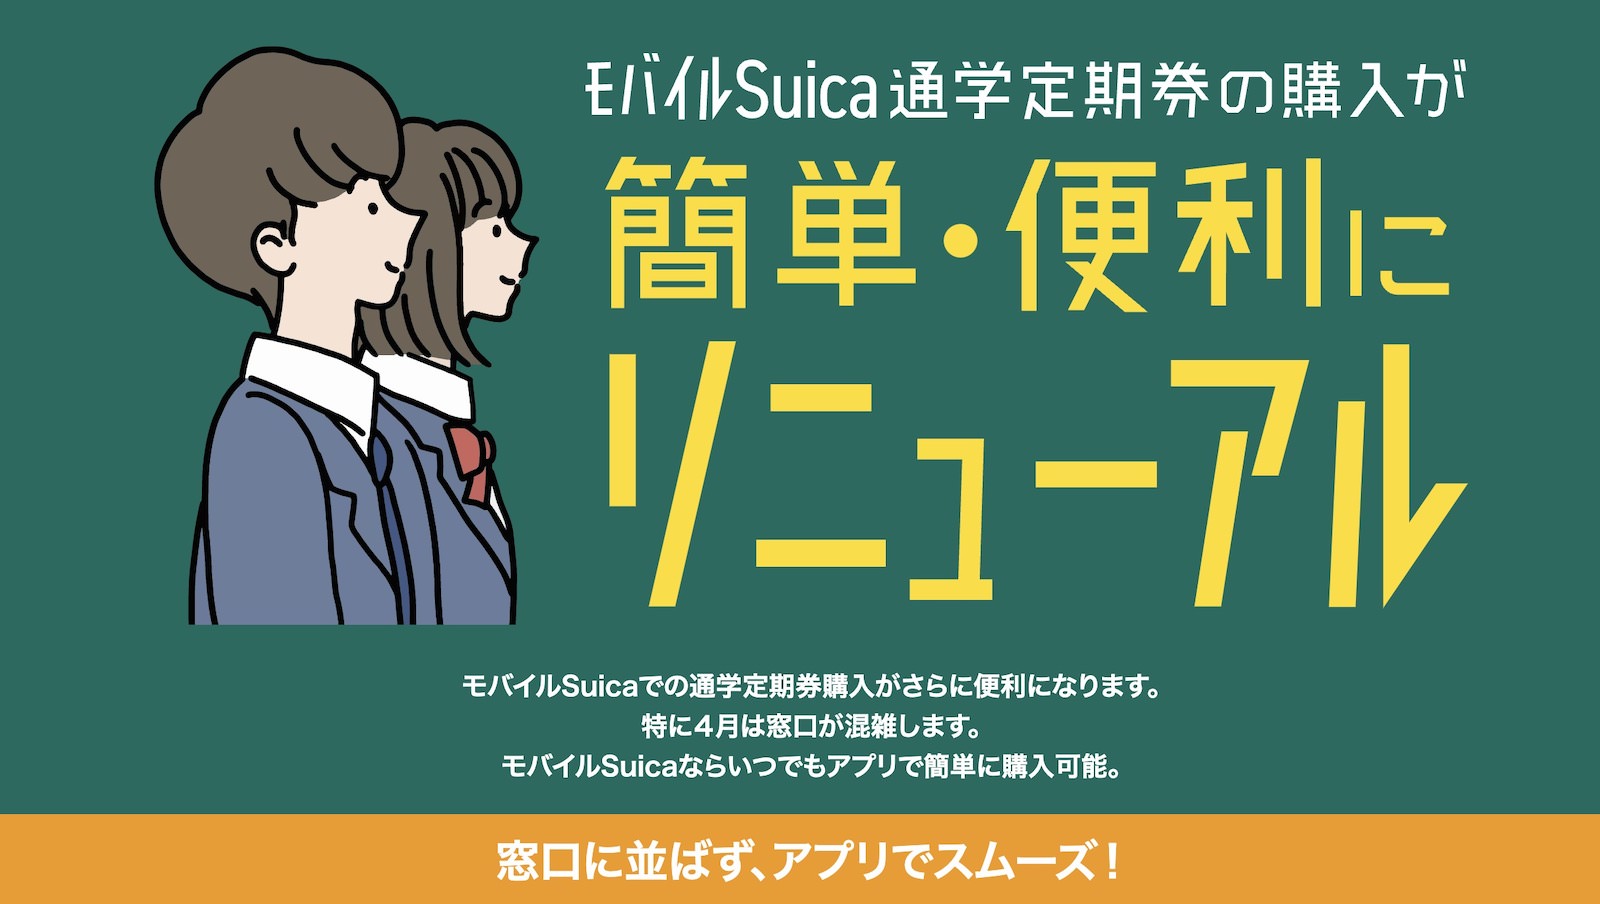 Mobile suica for students